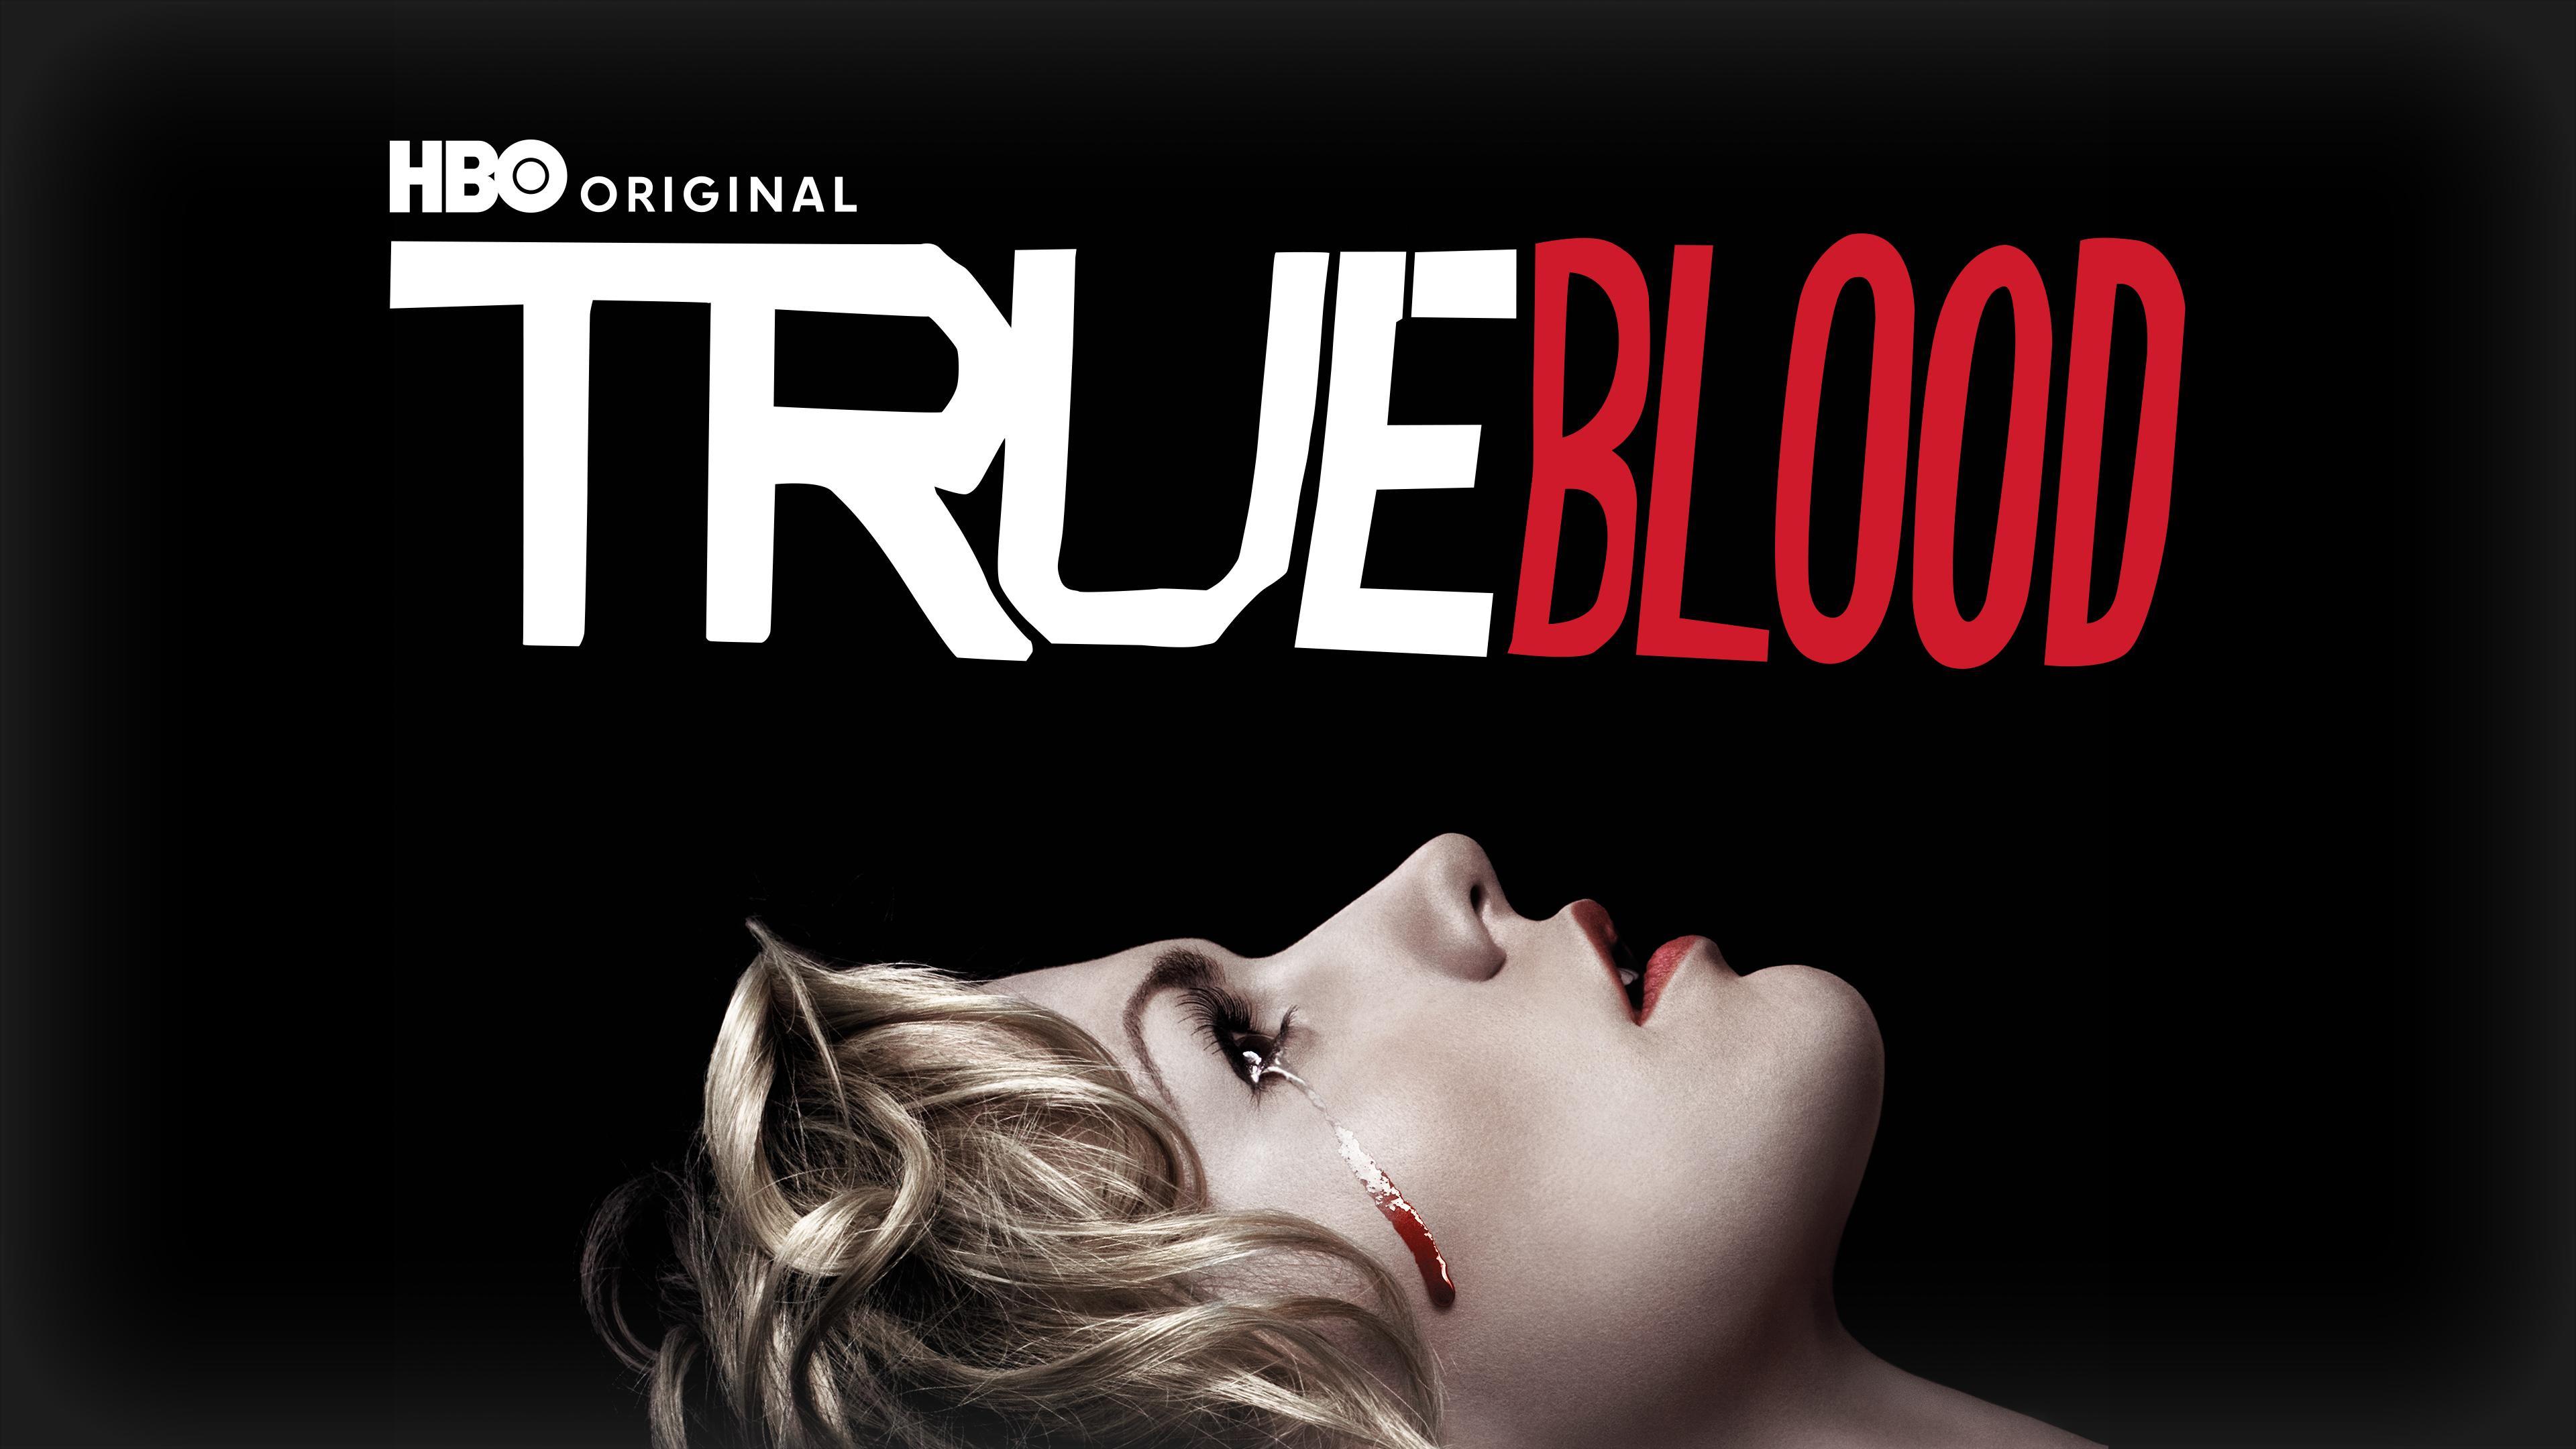 True Blood, Official Website for the HBO Series